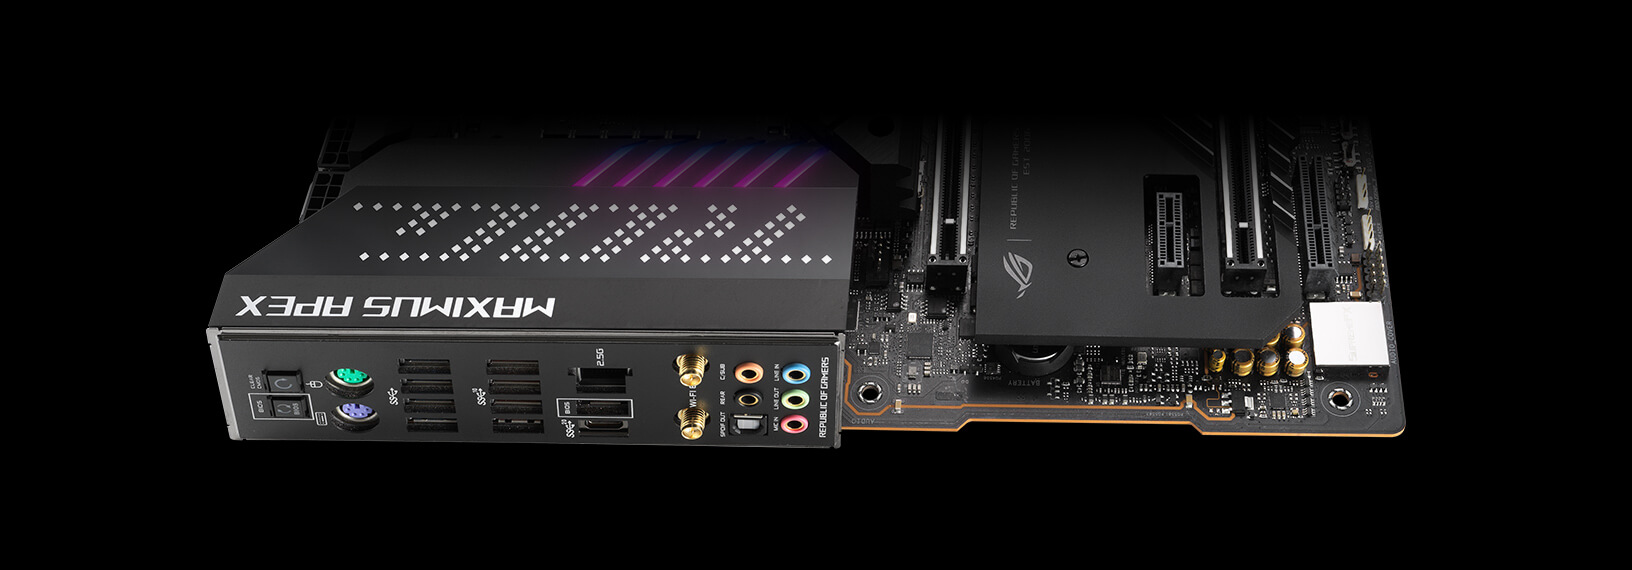 The ROG Maximus Z690 Apex motherboard features SupremeFX